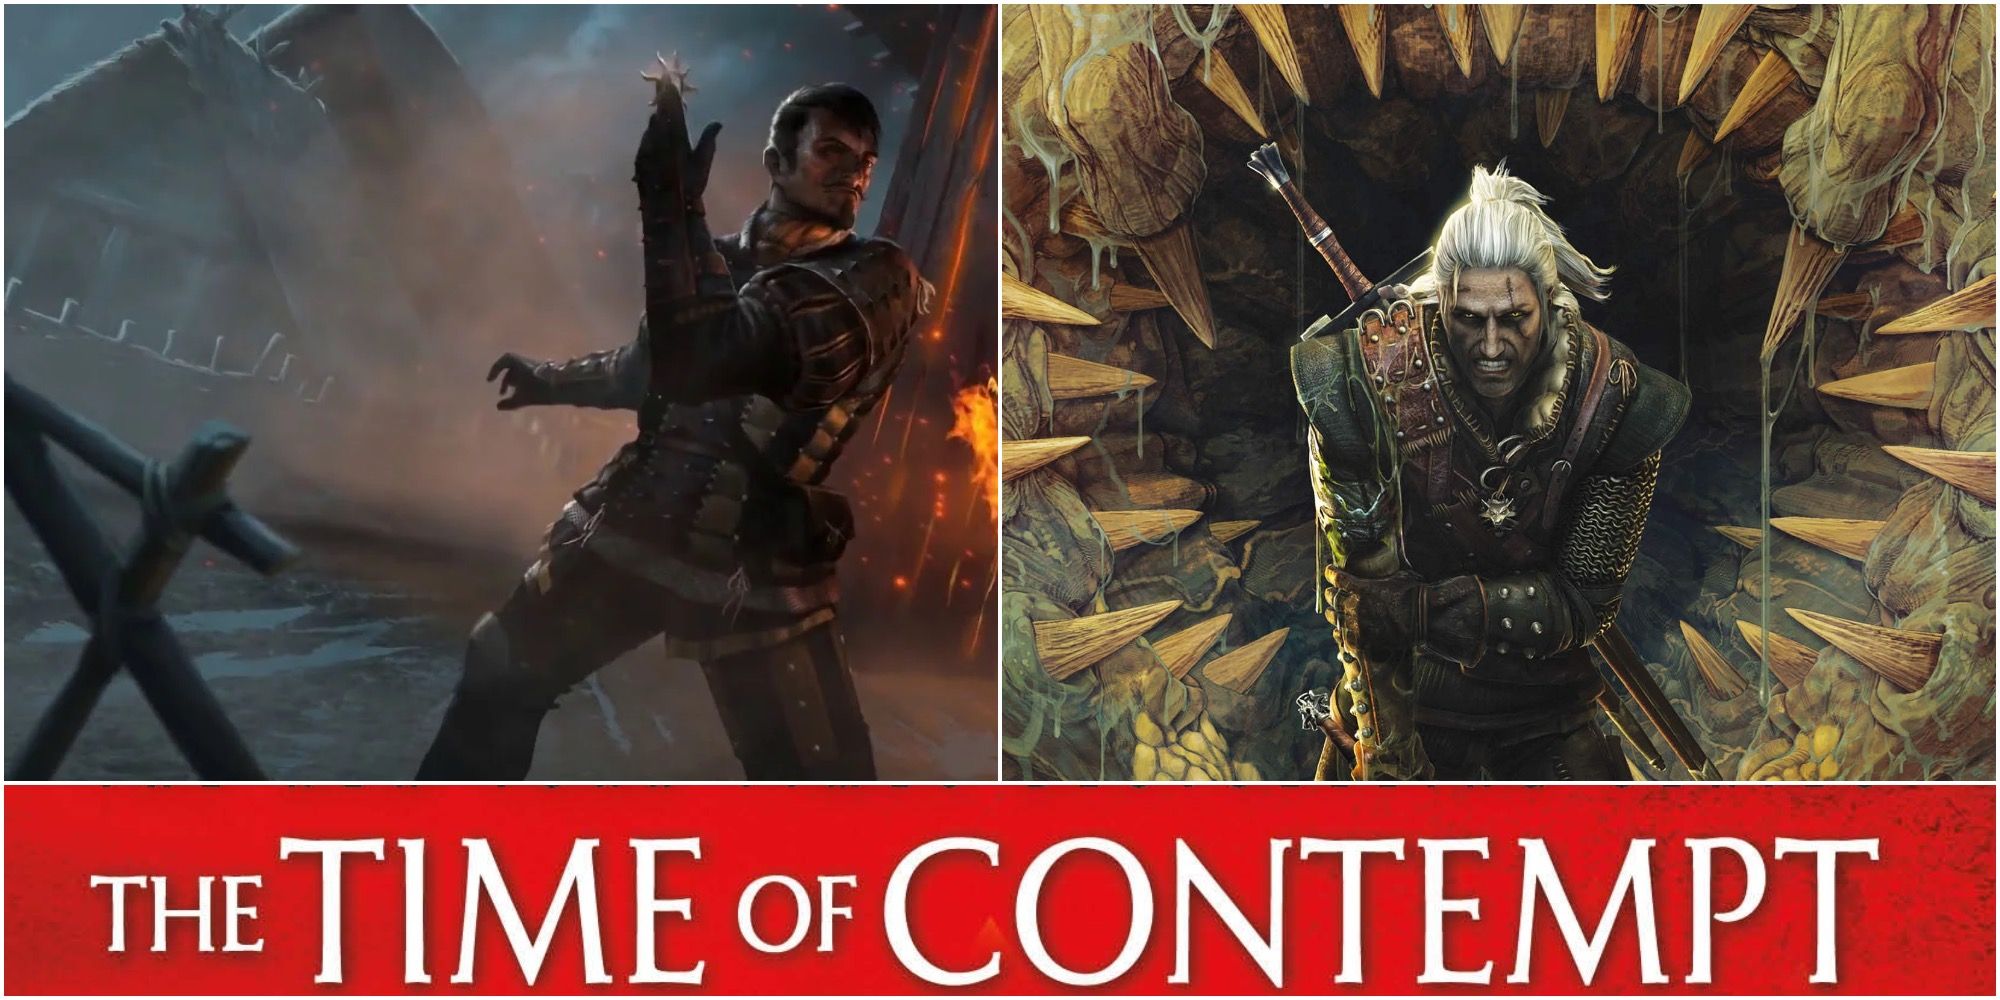 Collage Of The Witcher Books Time Of Contempt Andrzej Sapkowski Geralt Of Rivia And Stefan Skellige